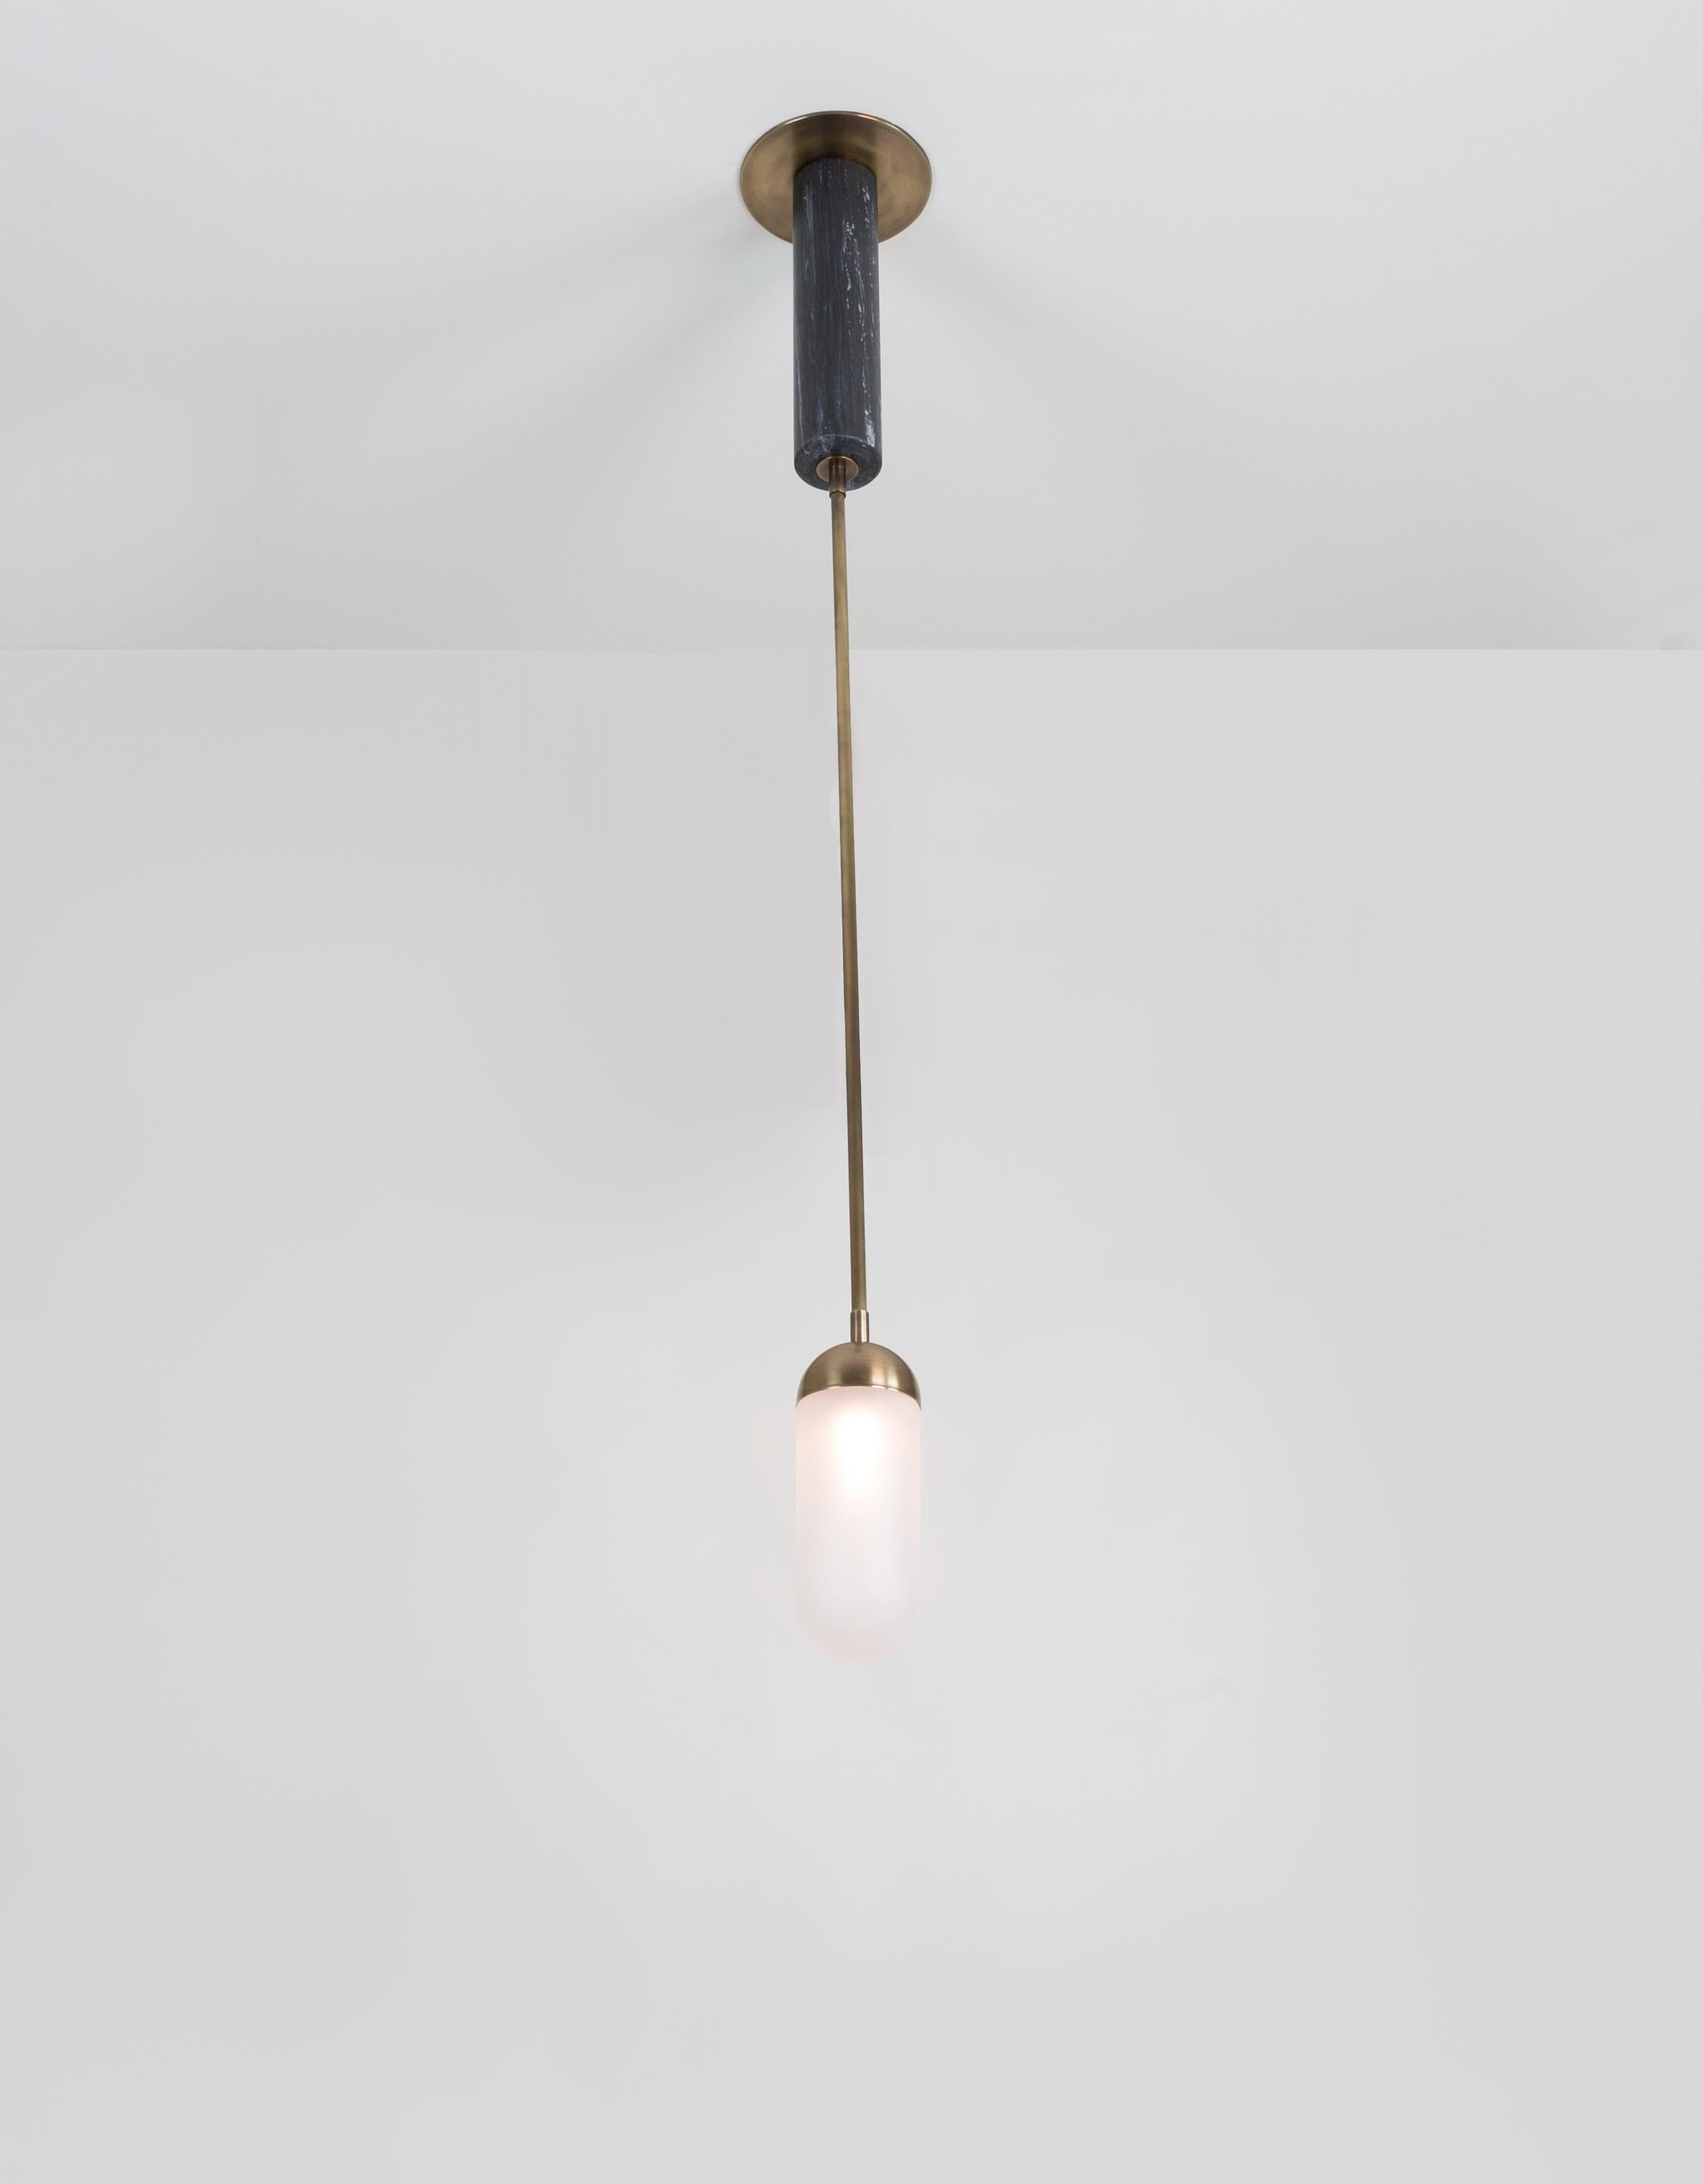 Small-scale single pendant by Kalin Asenov. Hand blown glass, marble, antique brass, lacquer finish. The pendant is part of the Meridian series including a ceiling pendant and a sconce listed on 1stDibs.
The specific listing is for a pair of